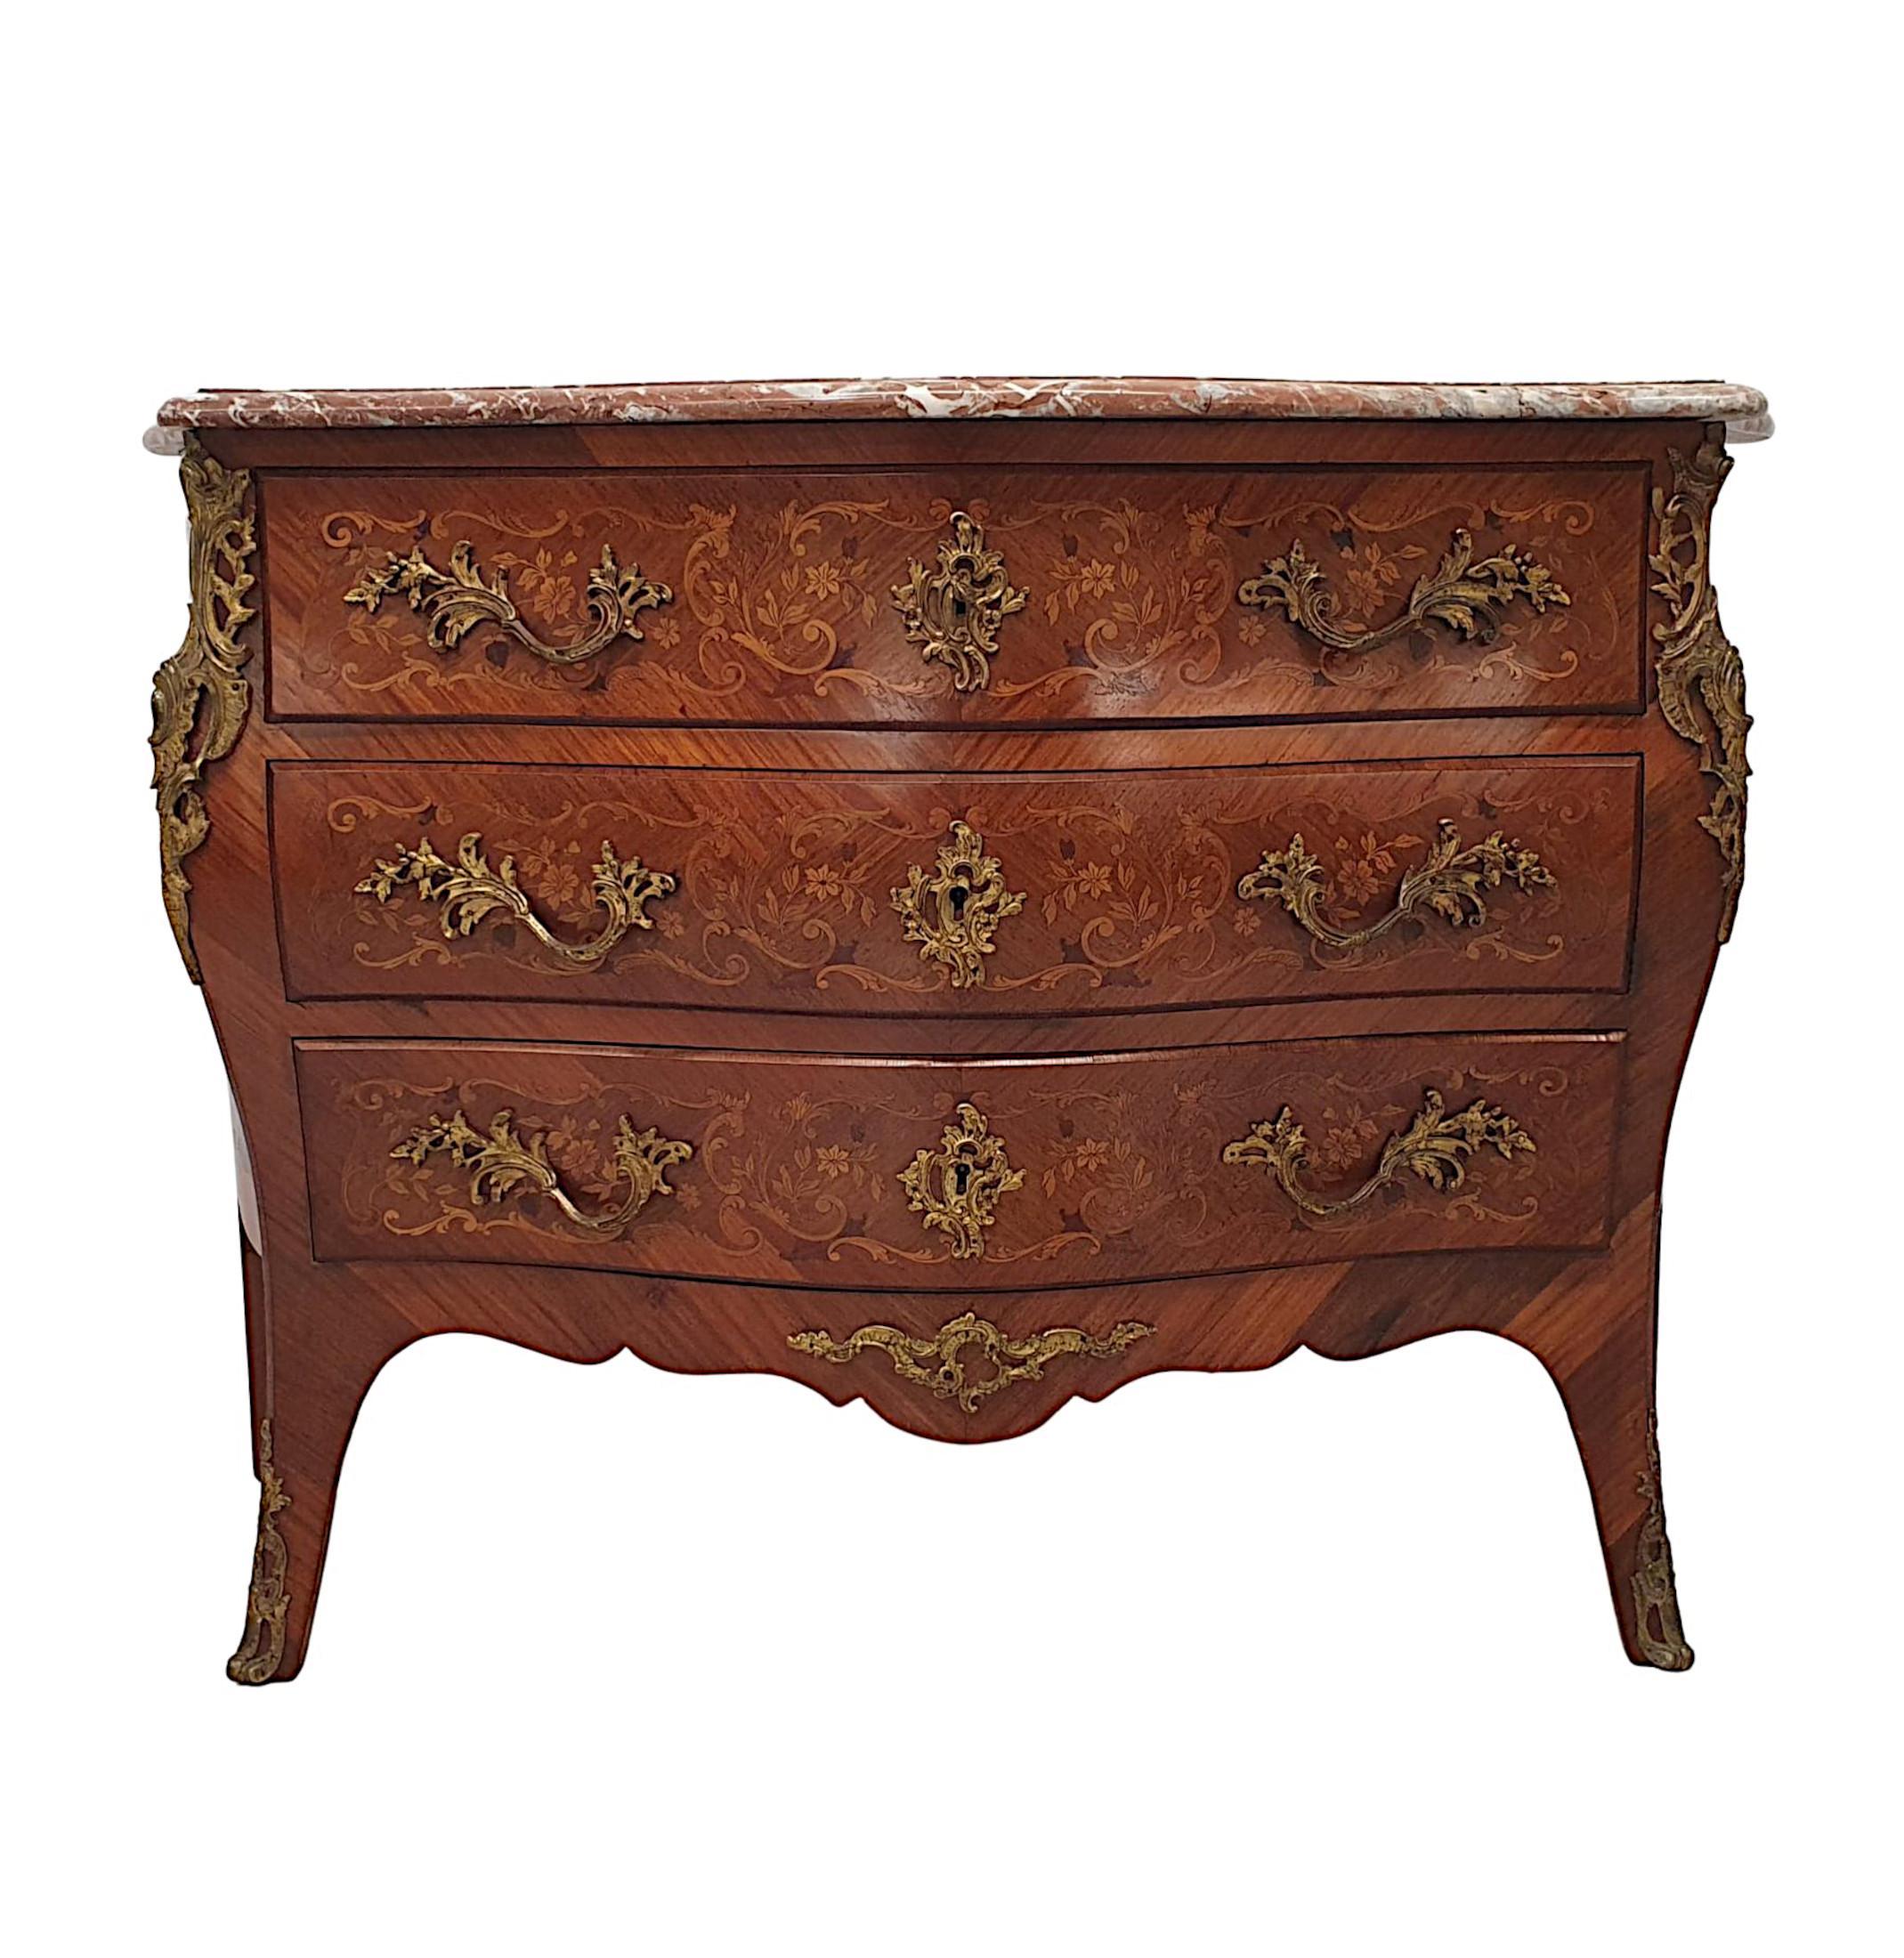 Very Fine 19th Century Marquetry Inlaid Marble Top Chest of Drawers In Good Condition For Sale In Dublin, IE